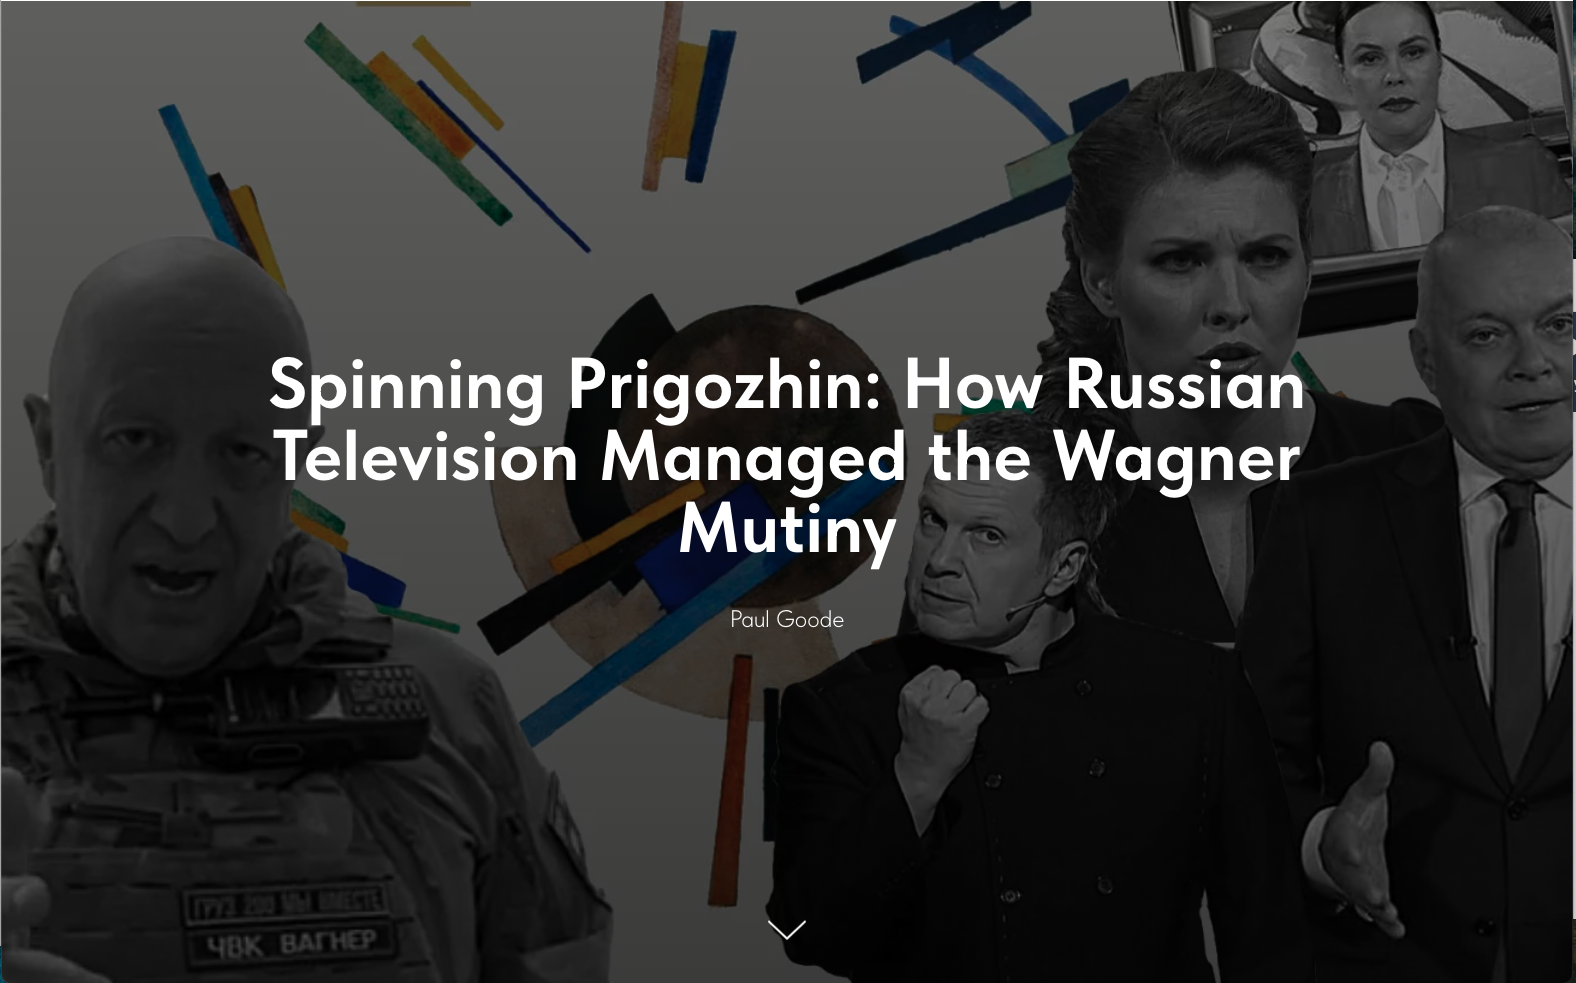 Russian Television and the War in Ukraine: Dr. Paul Goode recent articles